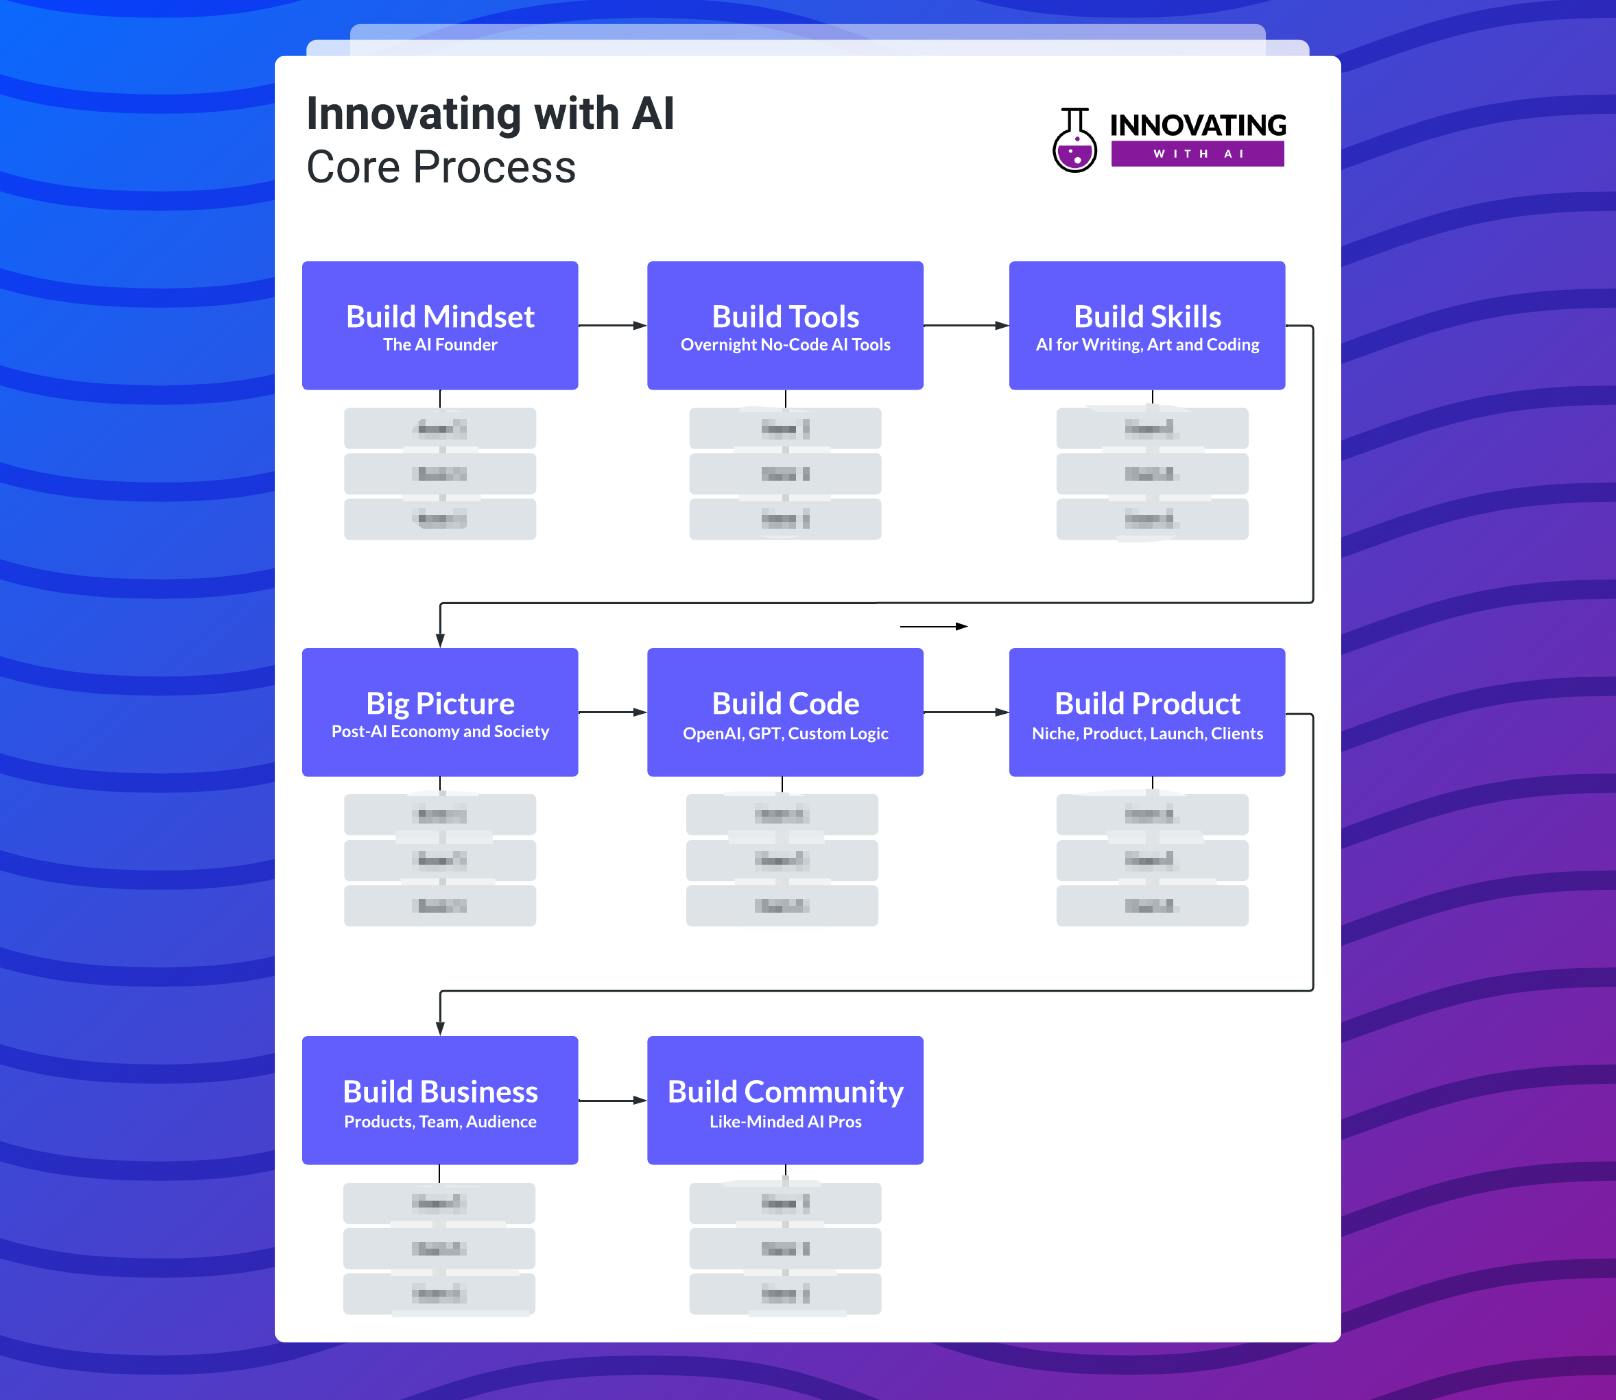 The Innovating with AI Core Process